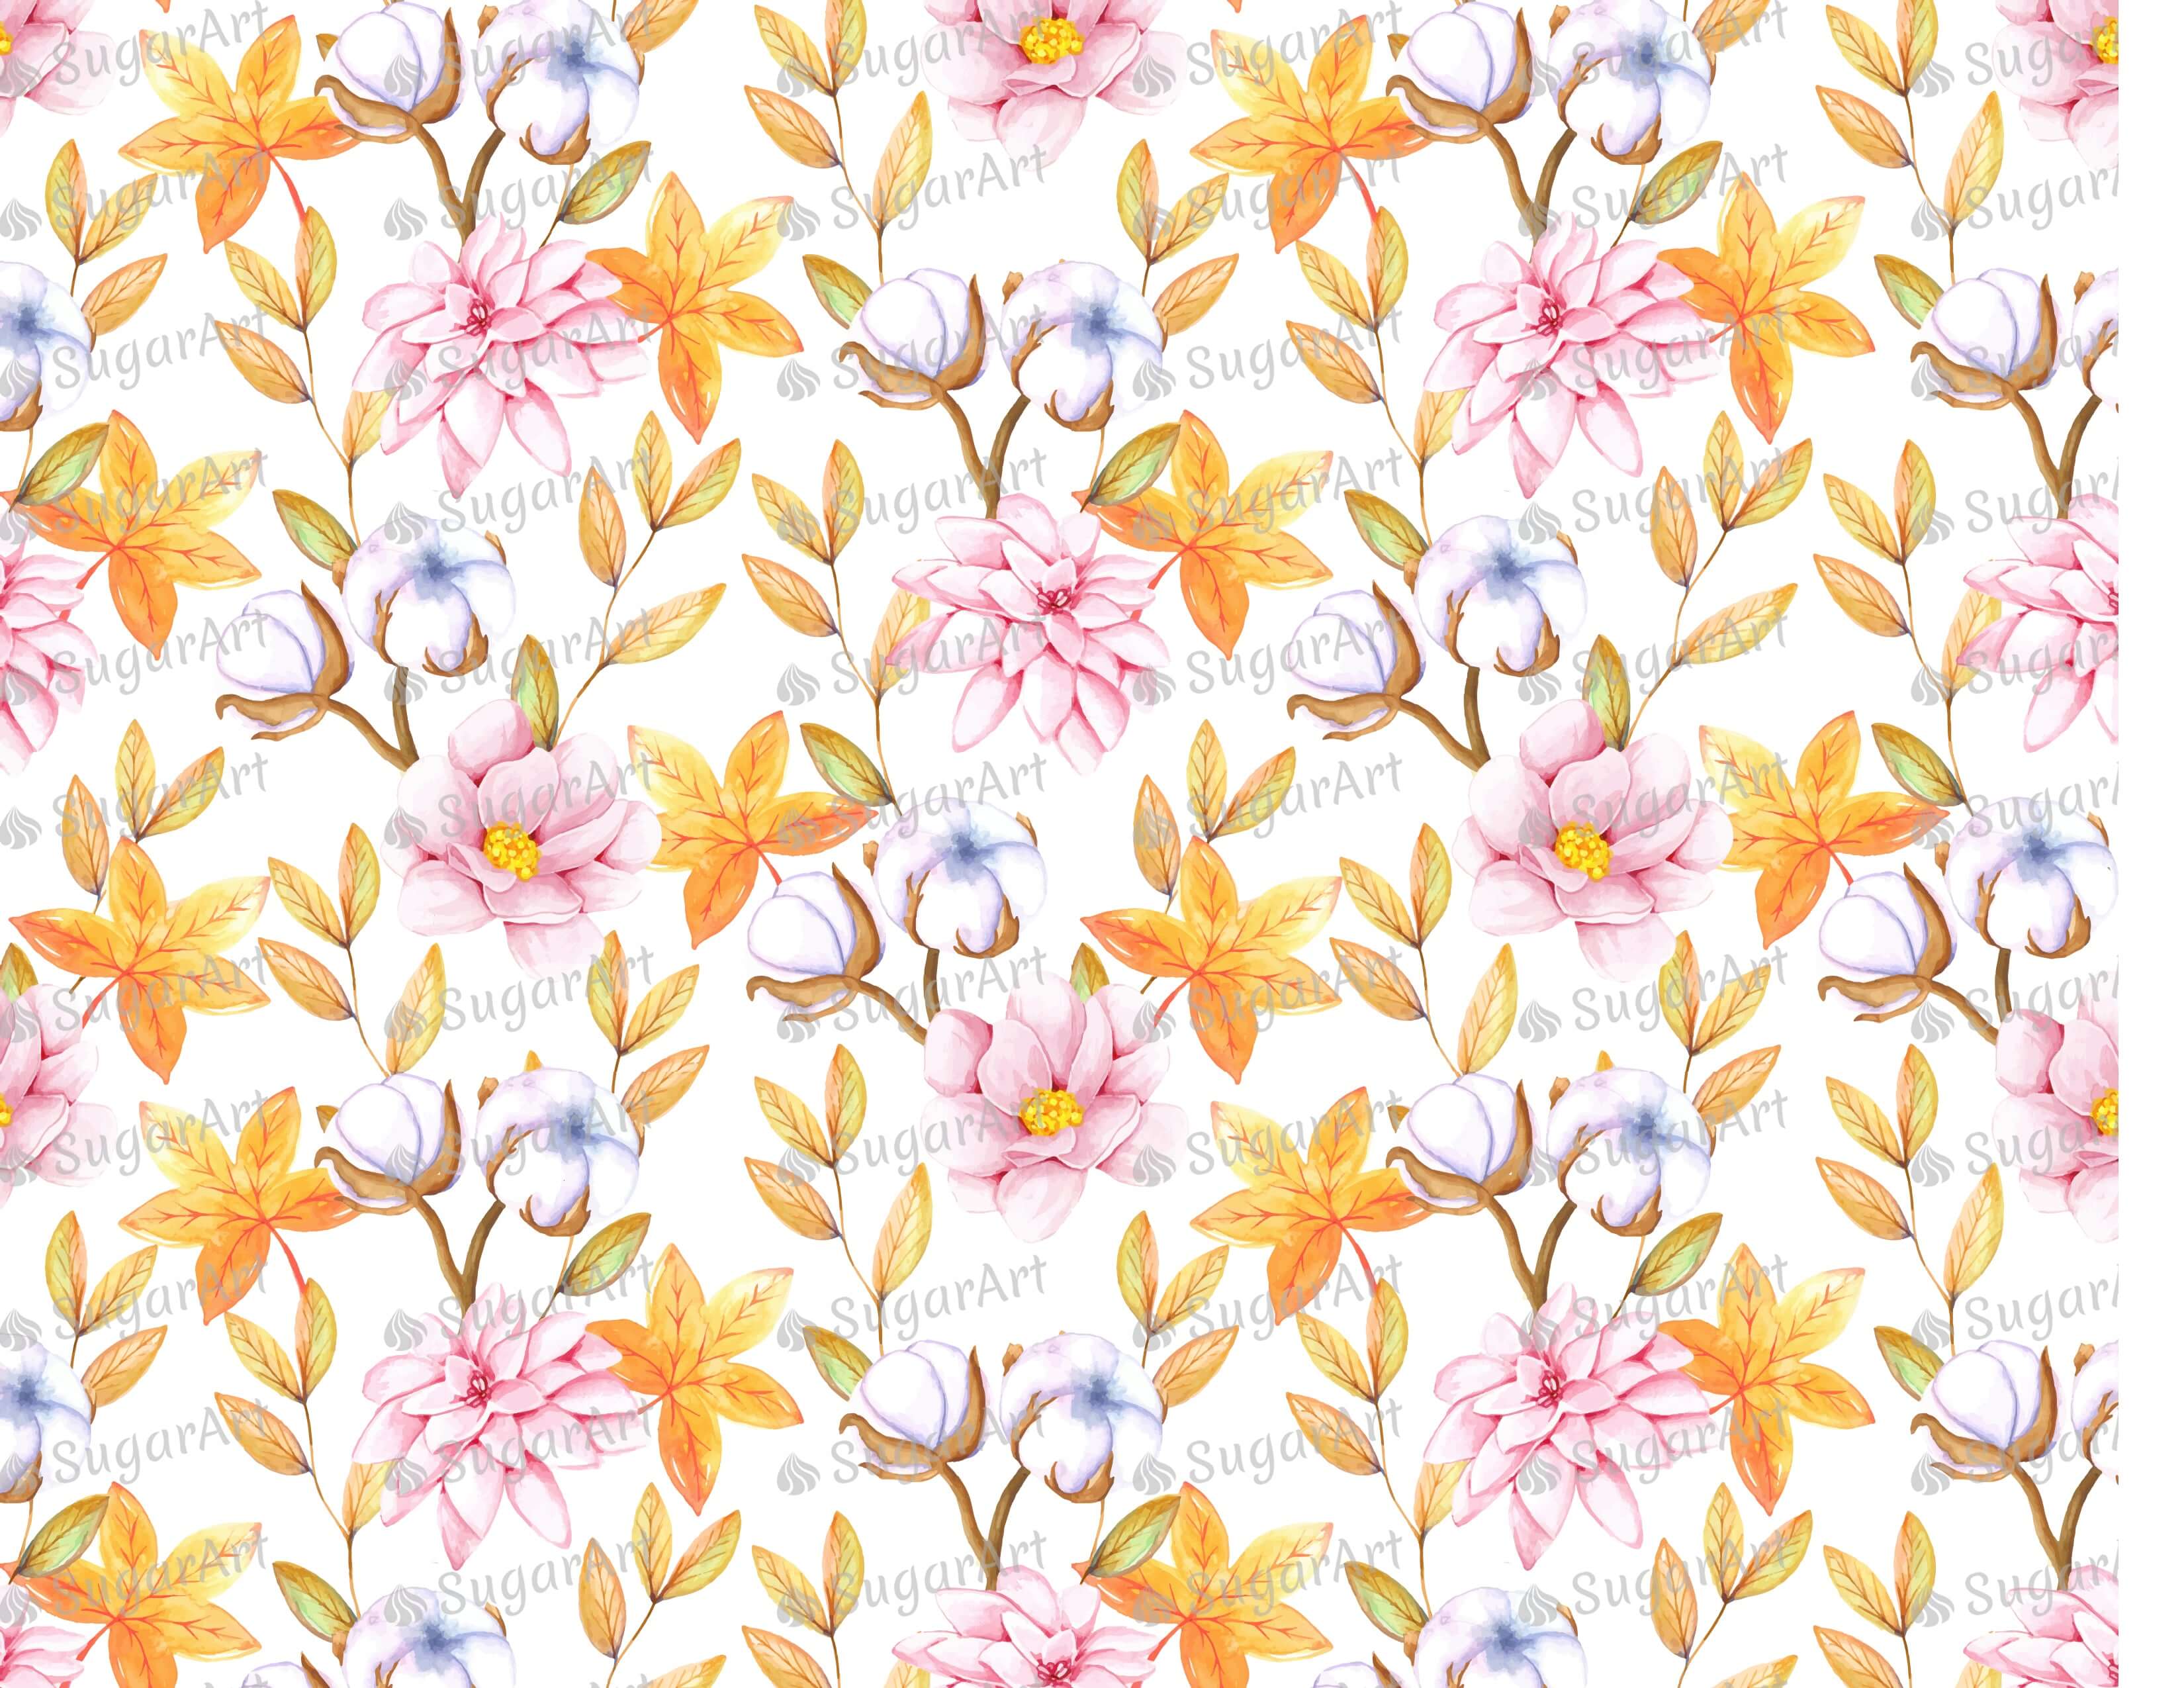 Fall Watercolor Pattern With Cotton Flowers - Icing - ISA114.